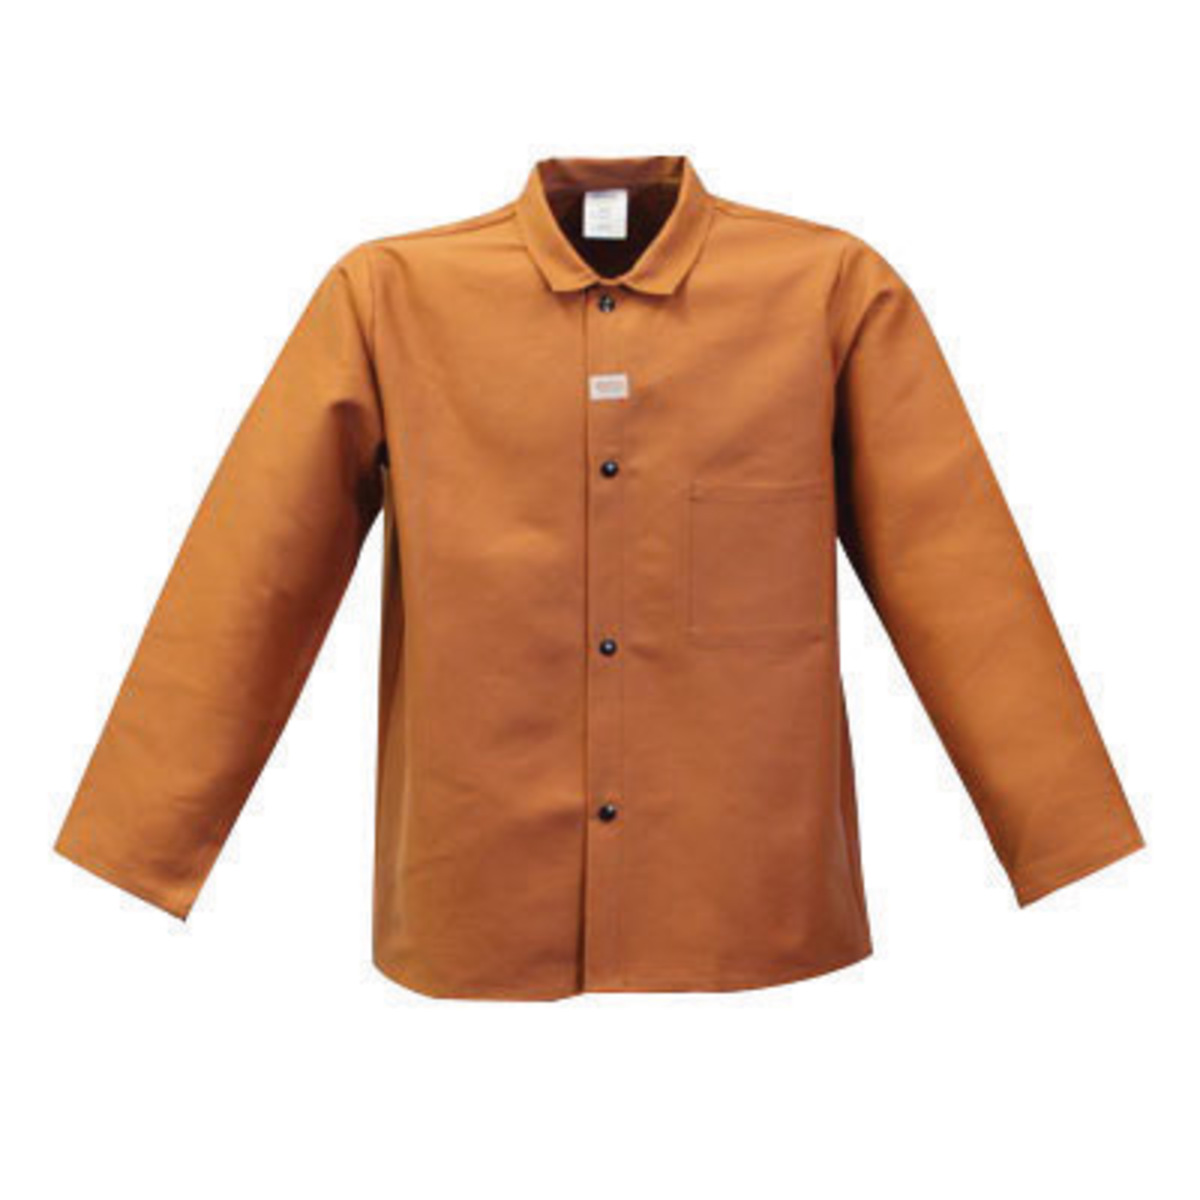 Stanco Safety Products™ Size 2X Rust Brown Cotton Flame Resistant Welding Jacket With Snap Closure And Leather Sleeves